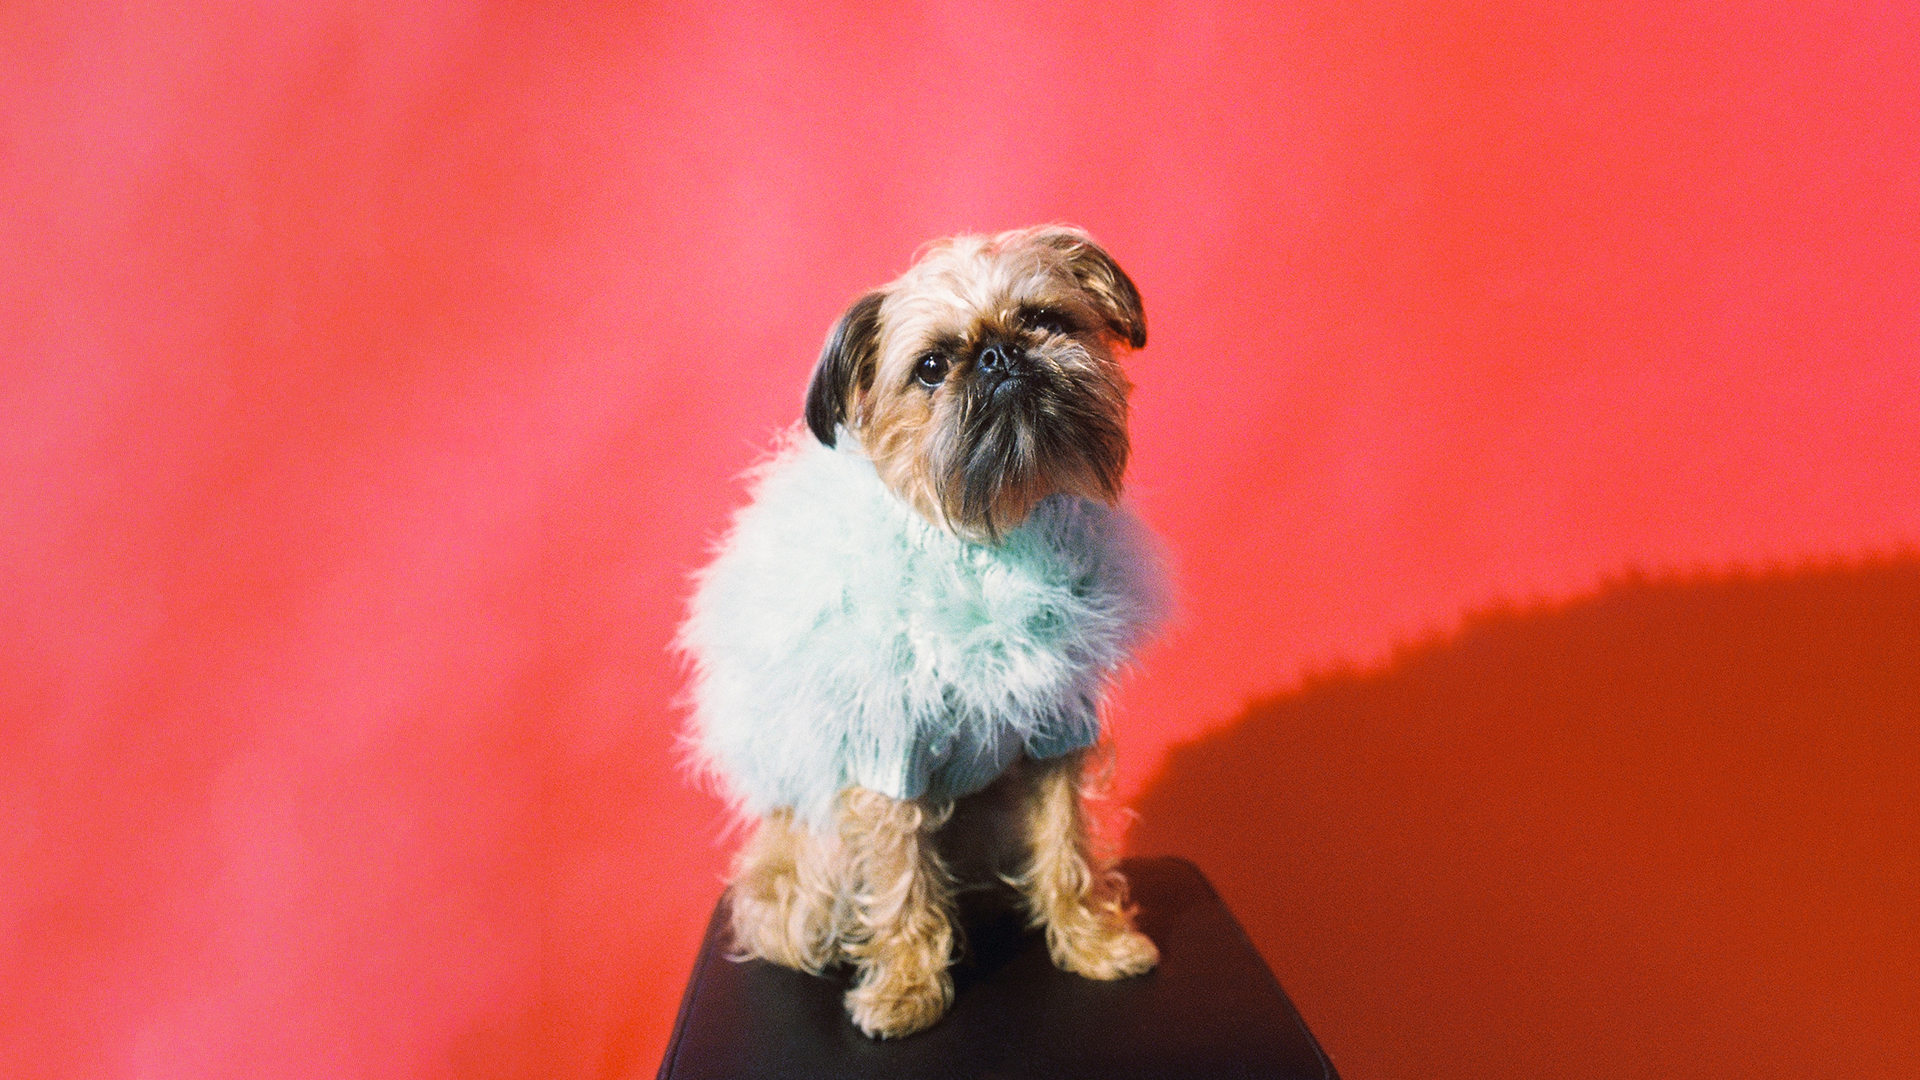 Maude the Griffon, wearing a fluffy baby blue jumper in front of a red background.